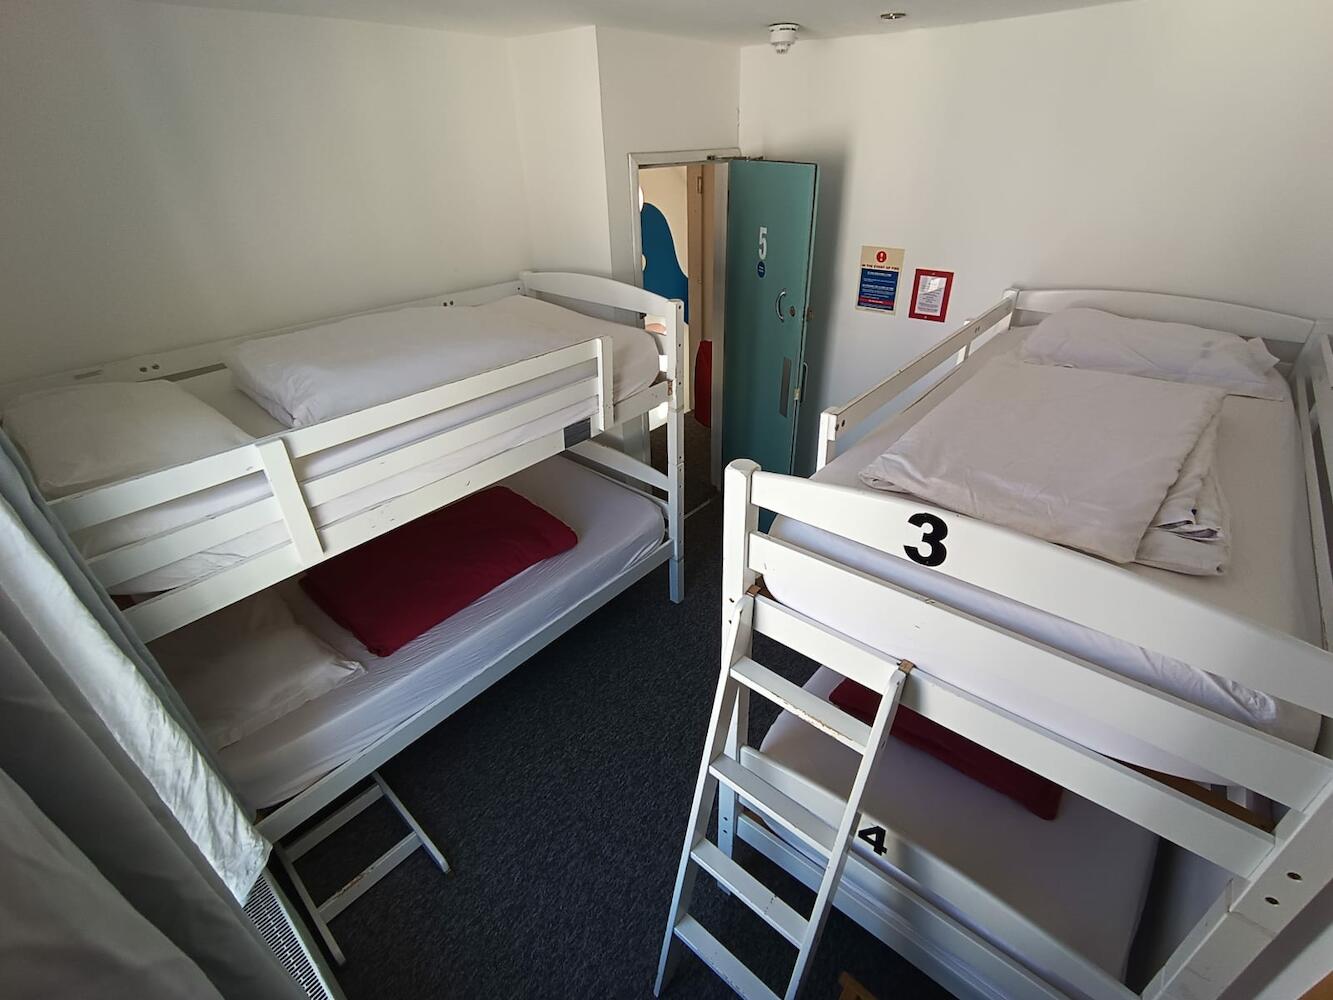 Seadragon Backpackers in Brighton - Prices 2020 (Compare Prices at Hostelworld + Booking)